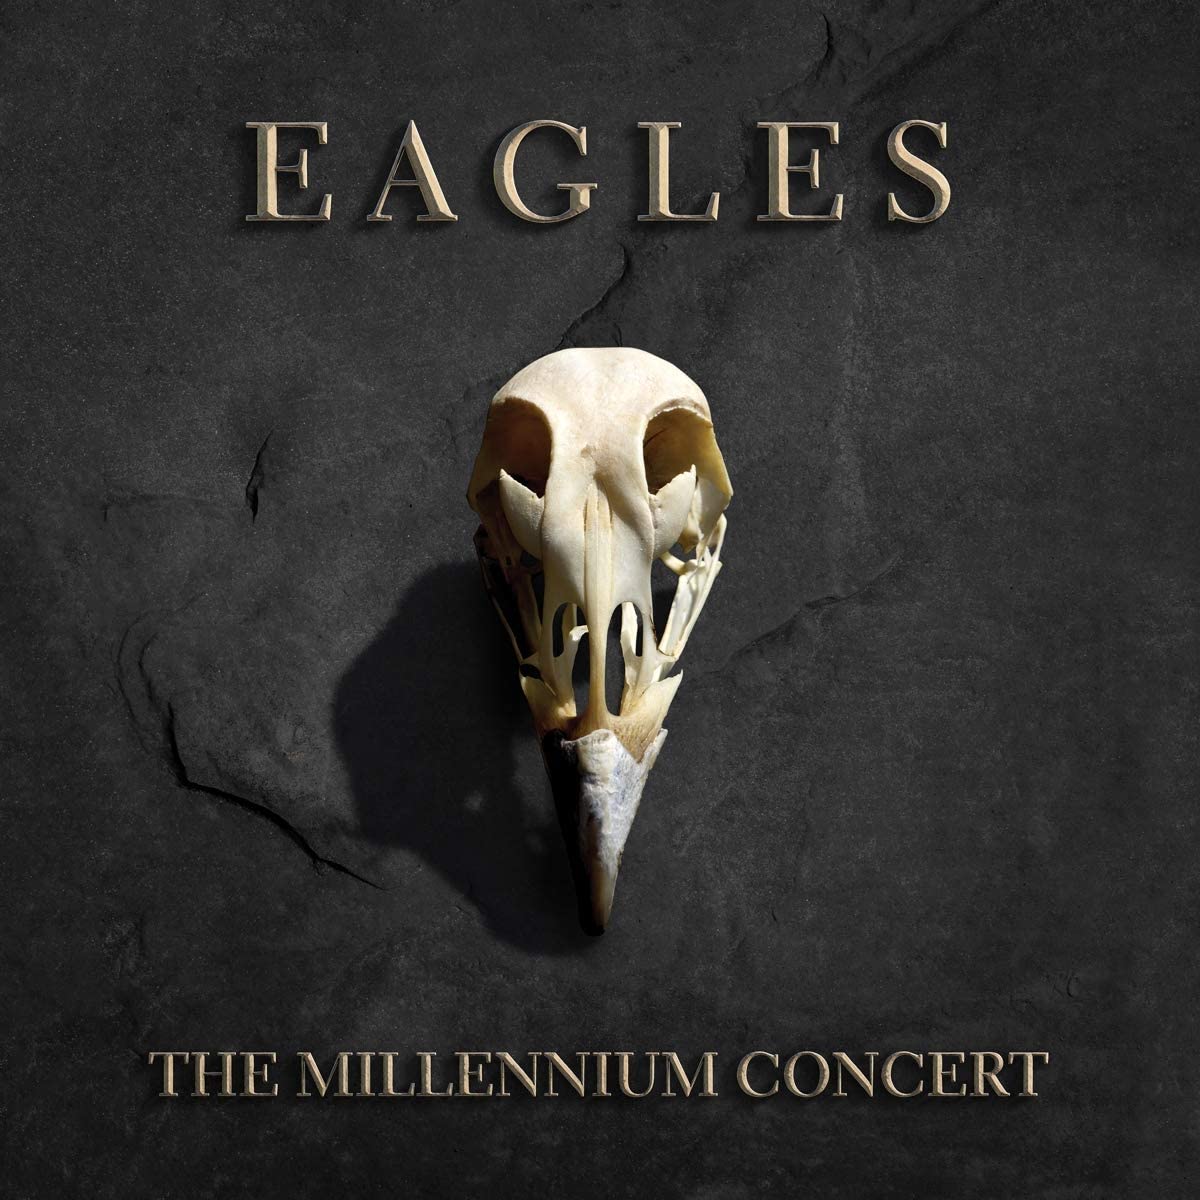 Recorded at the Staples Centre in Los Angeles, CA, this release marks a first time on standalone vinyl. Originally included in the 'Selected Works 1972-1999' CD boxed set, the live show includes some of Eagles' biggest hits featuring 'Hotel California', 'Please Come Home for Christmas', and 'Take It to the Limit'.